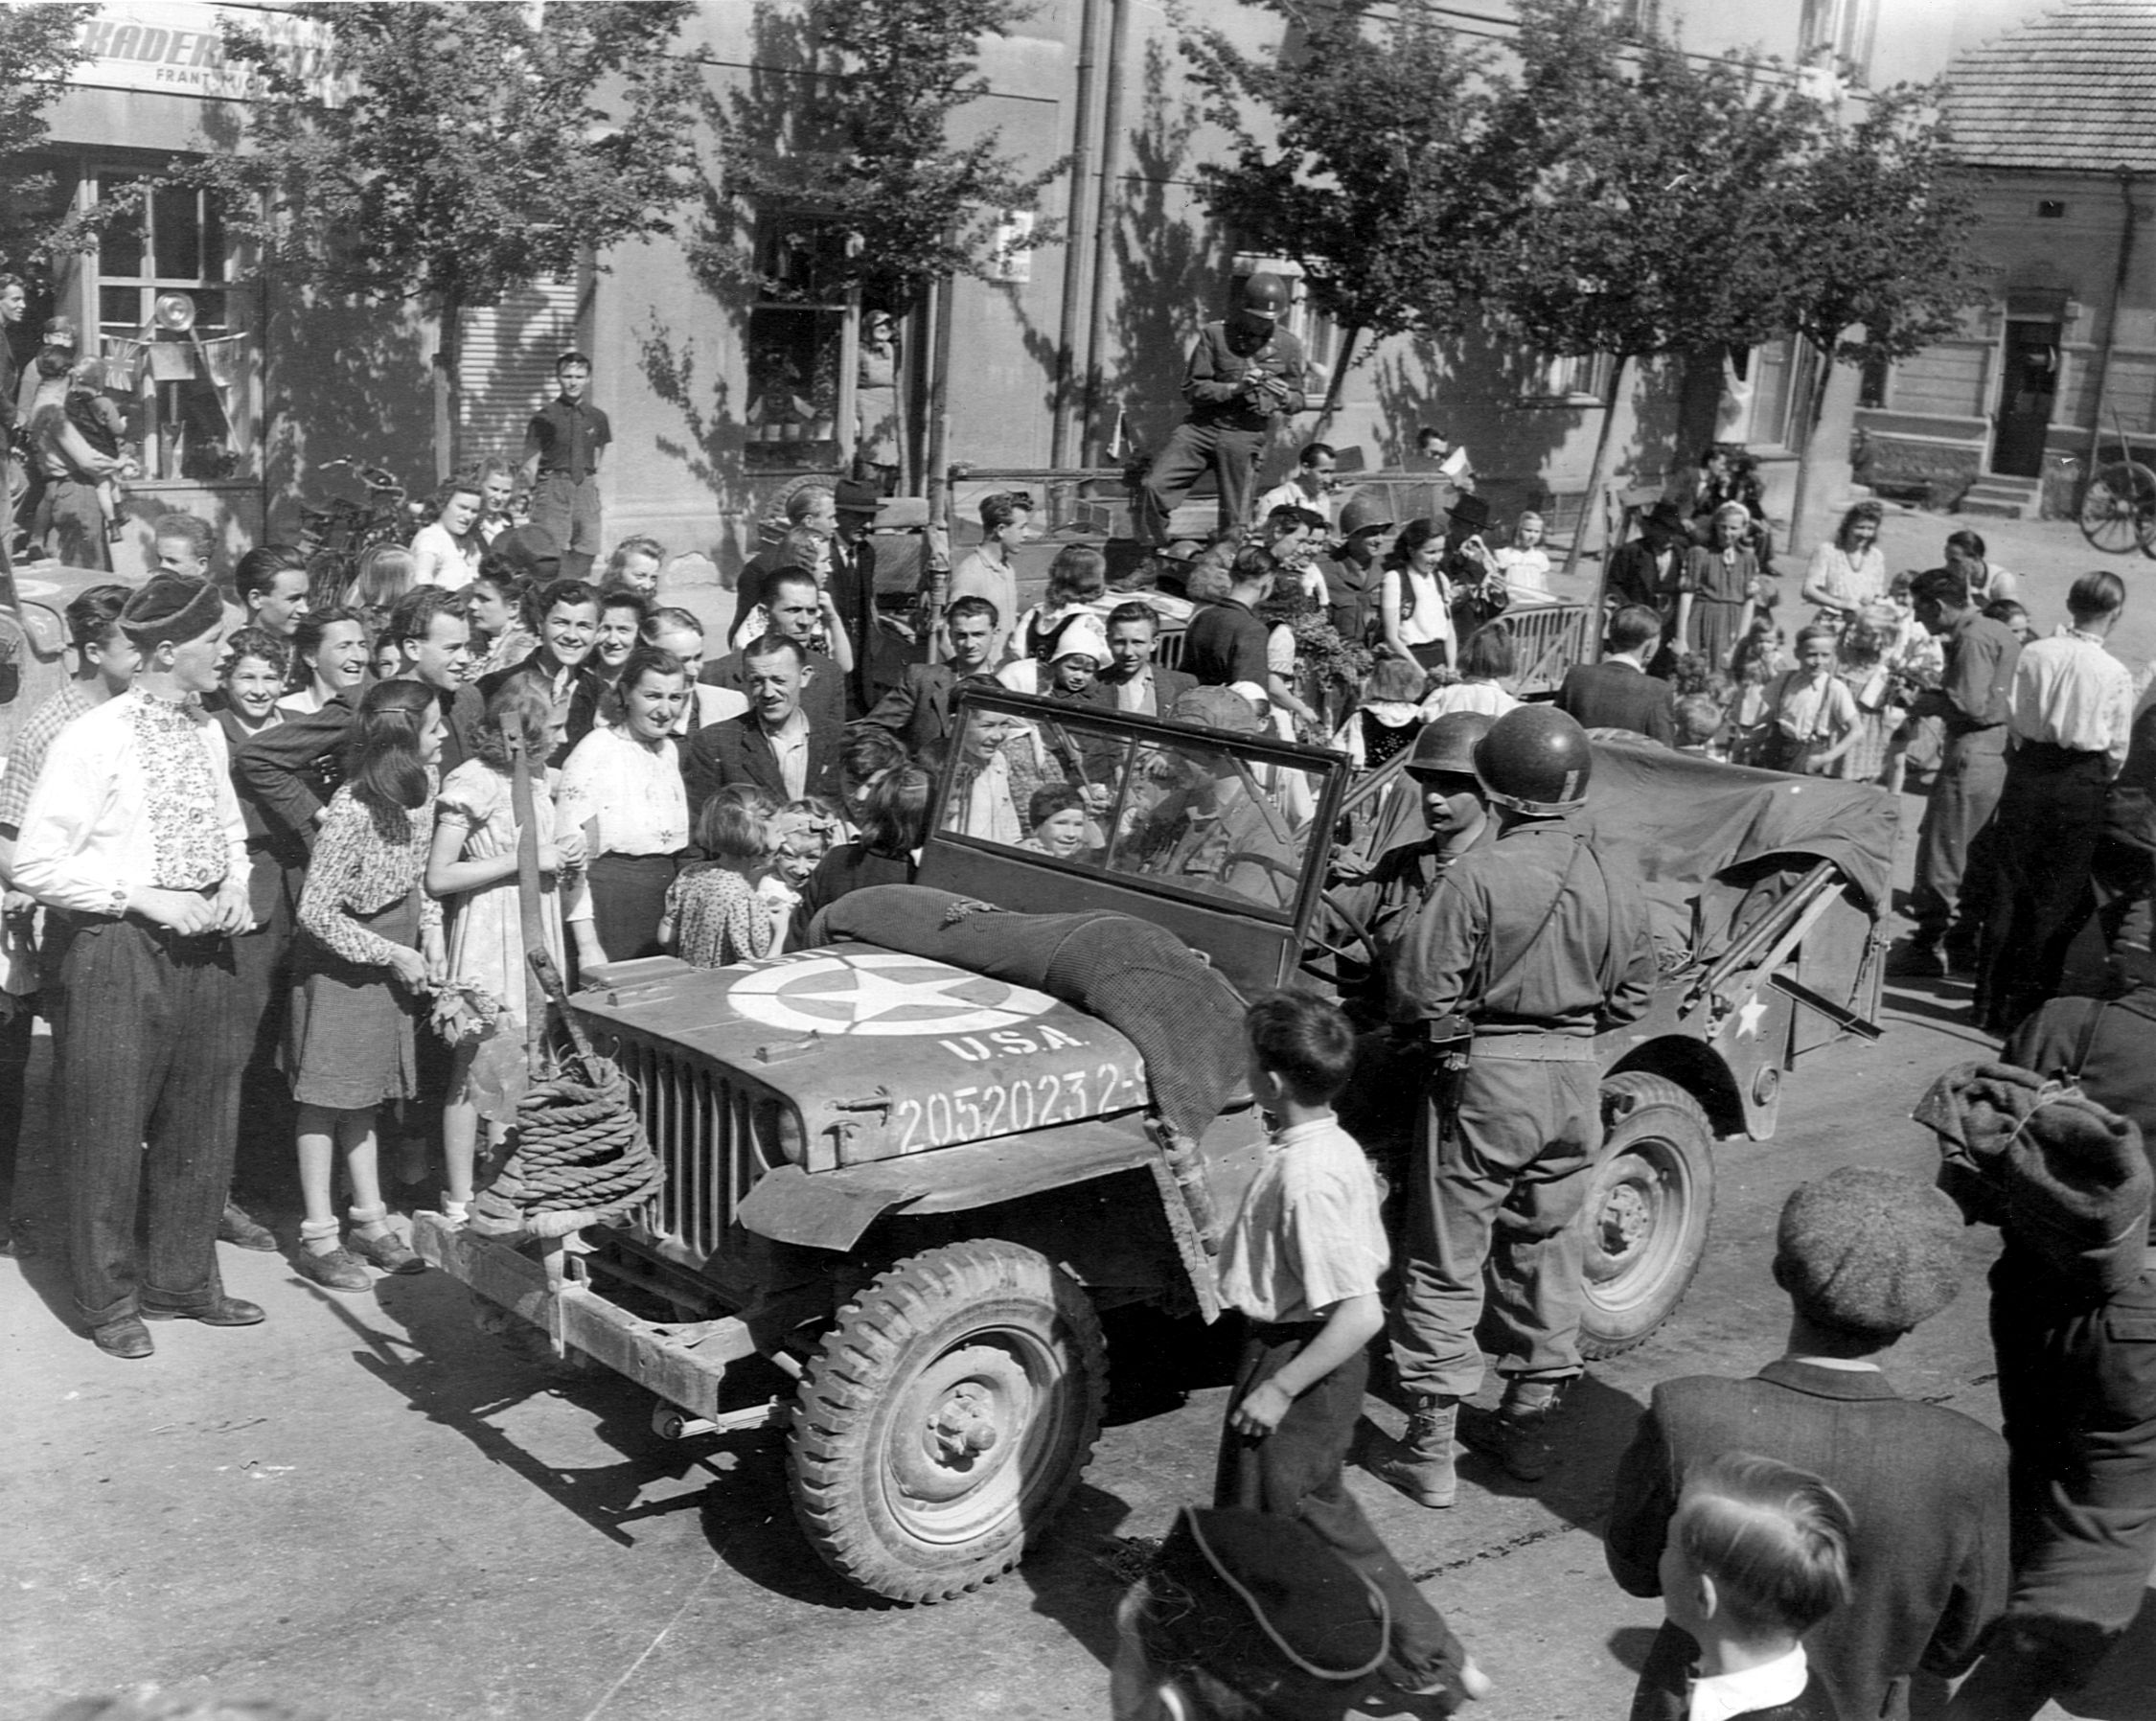 Czech civilians crowd around a U.S. Army jeep as American troops are welcomed into the liberated capital city of Prague on May 8, 1945.